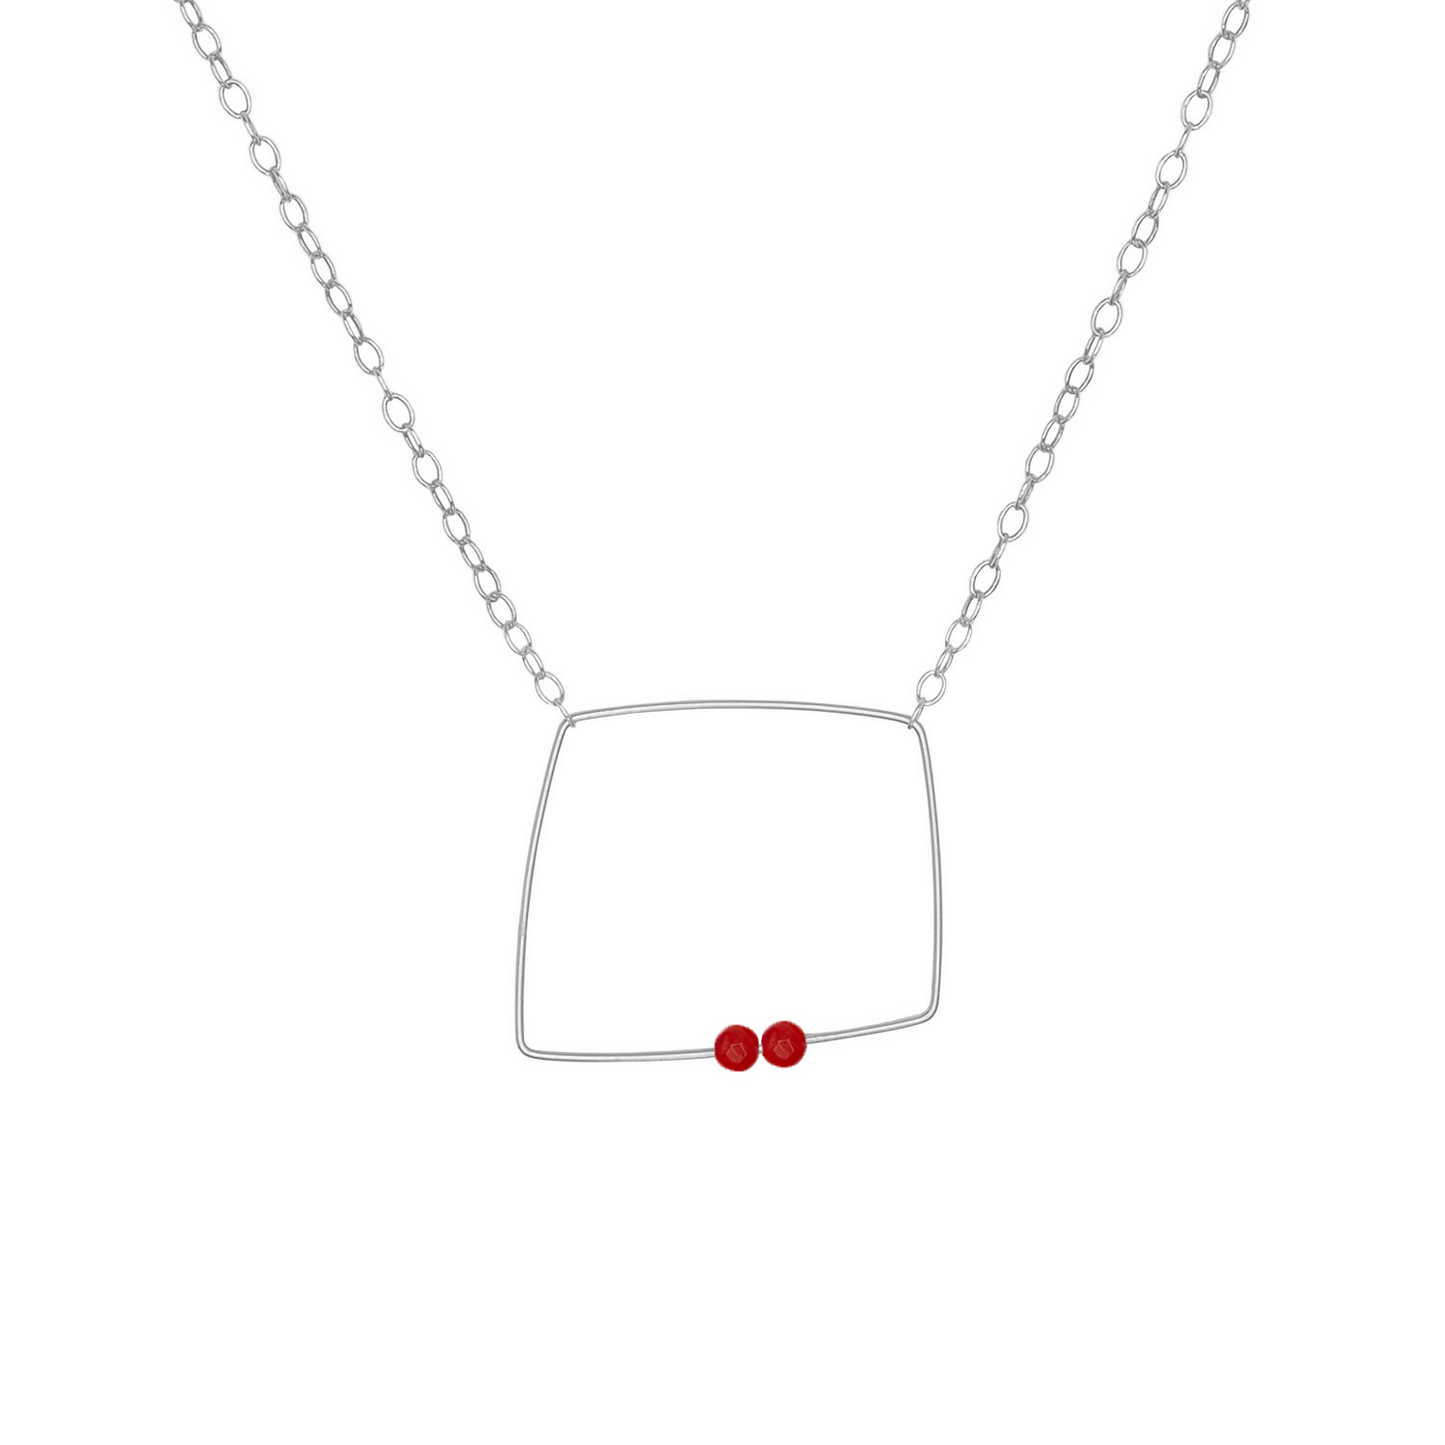 Small Square Pendant Necklace with choice of Round Gemstone Beads